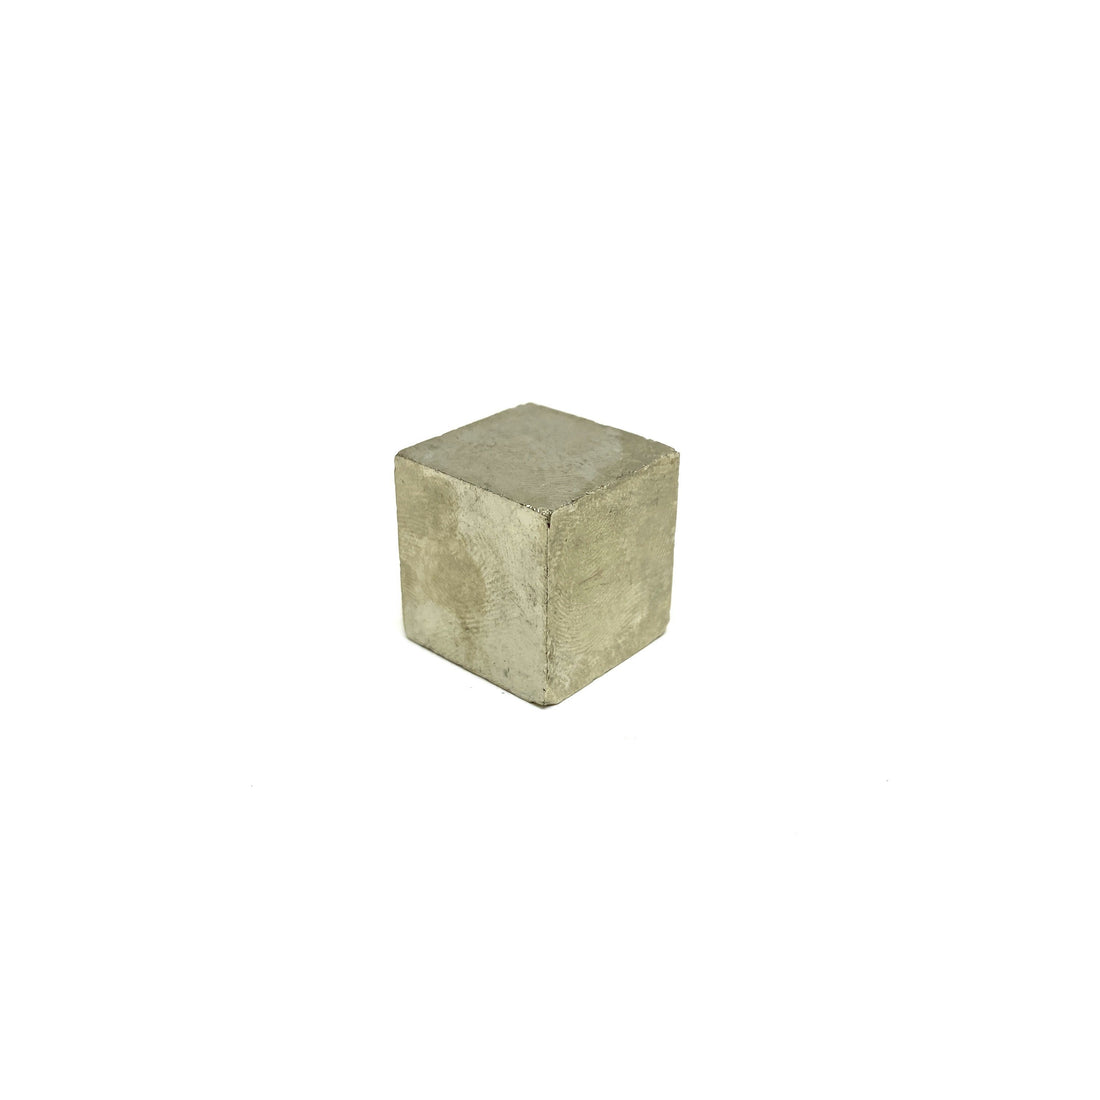 Pyrite Cube Pyrite Crystals A. $4.00 